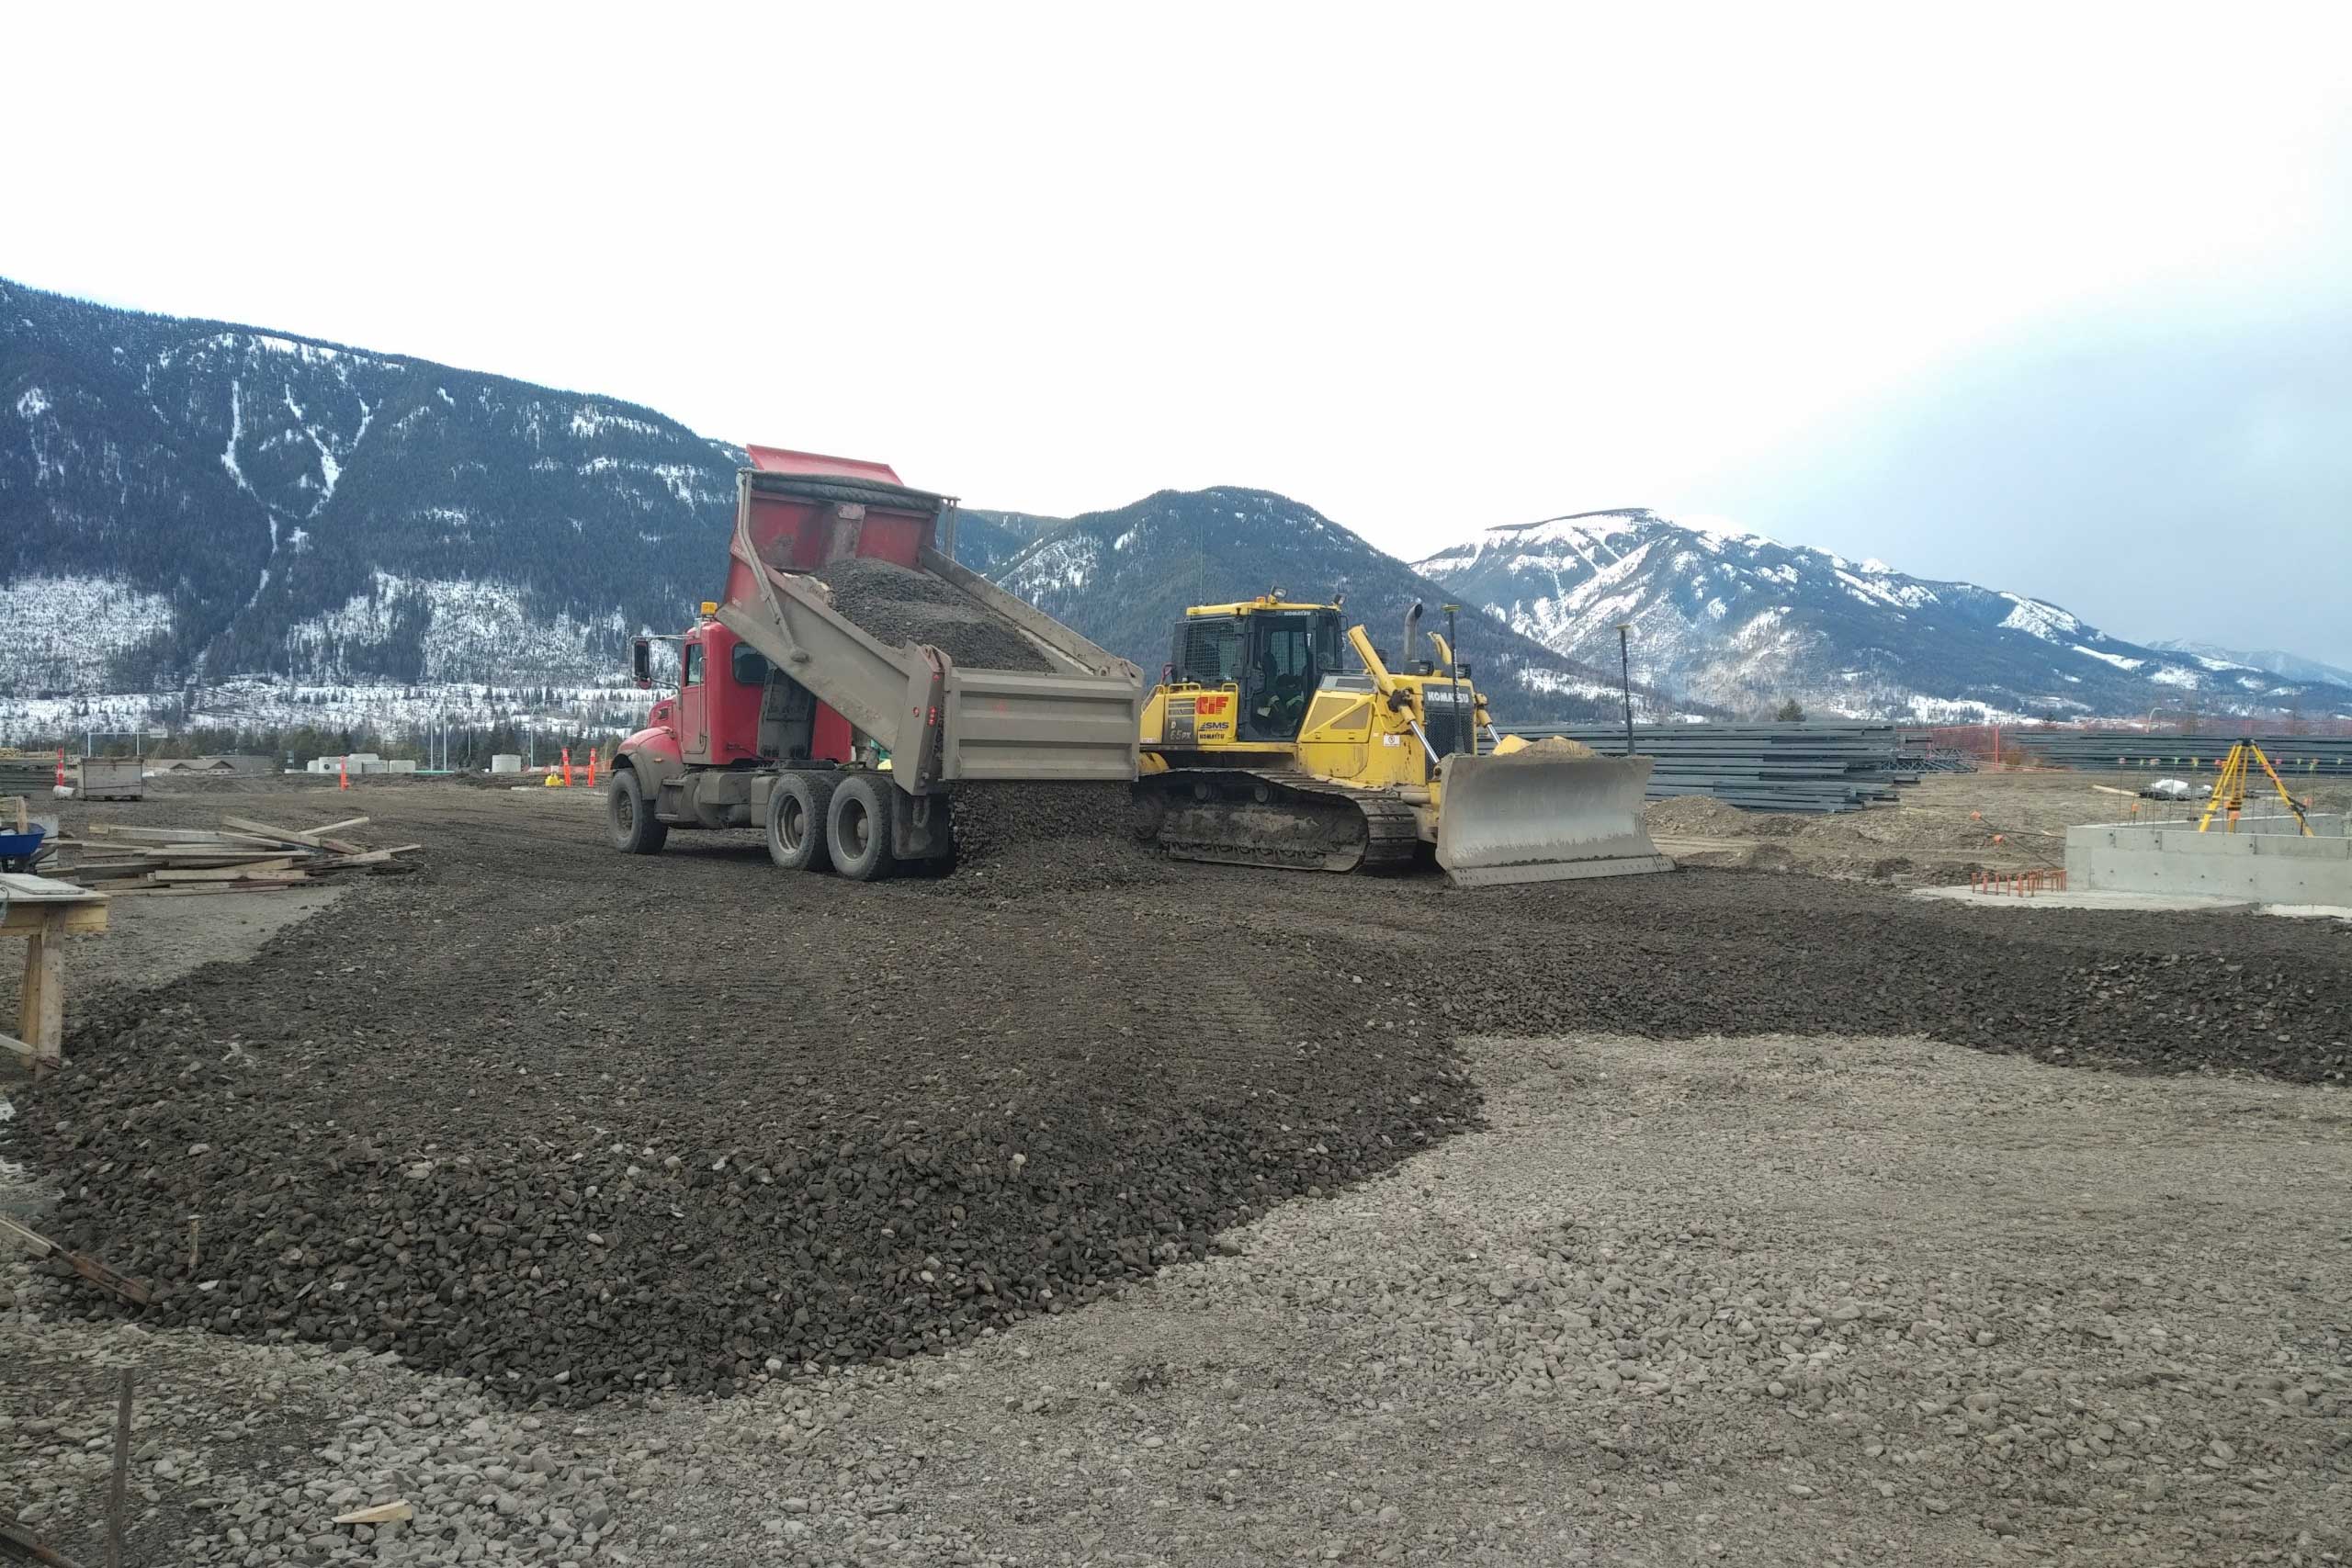 Loader and dump truck at the Komatsu Manufacturing Plant